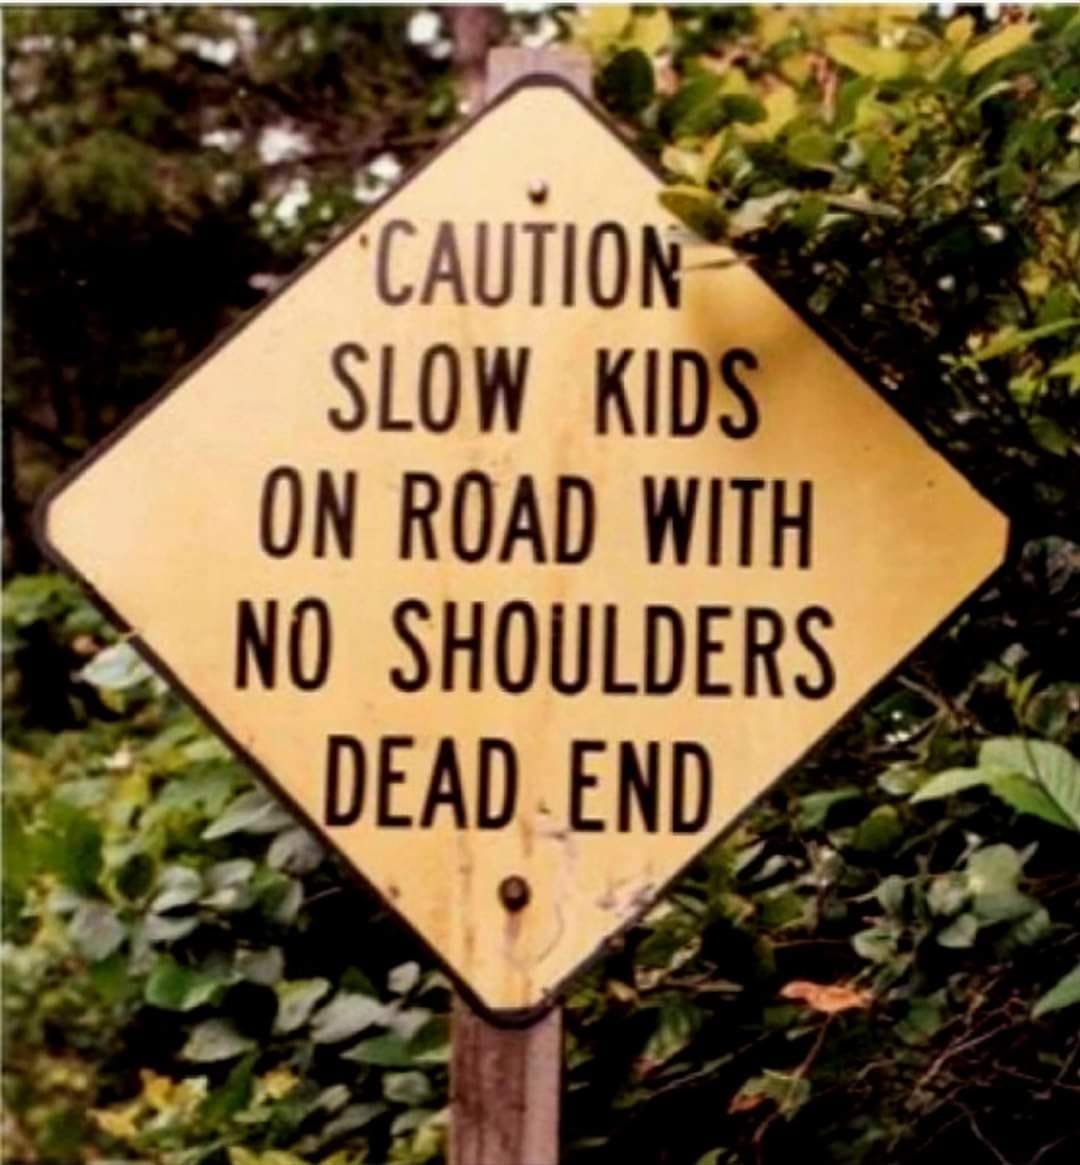 monday morning randomness - loading cat memes - Caution Slow Kids On Road With No Shoulders Dead End